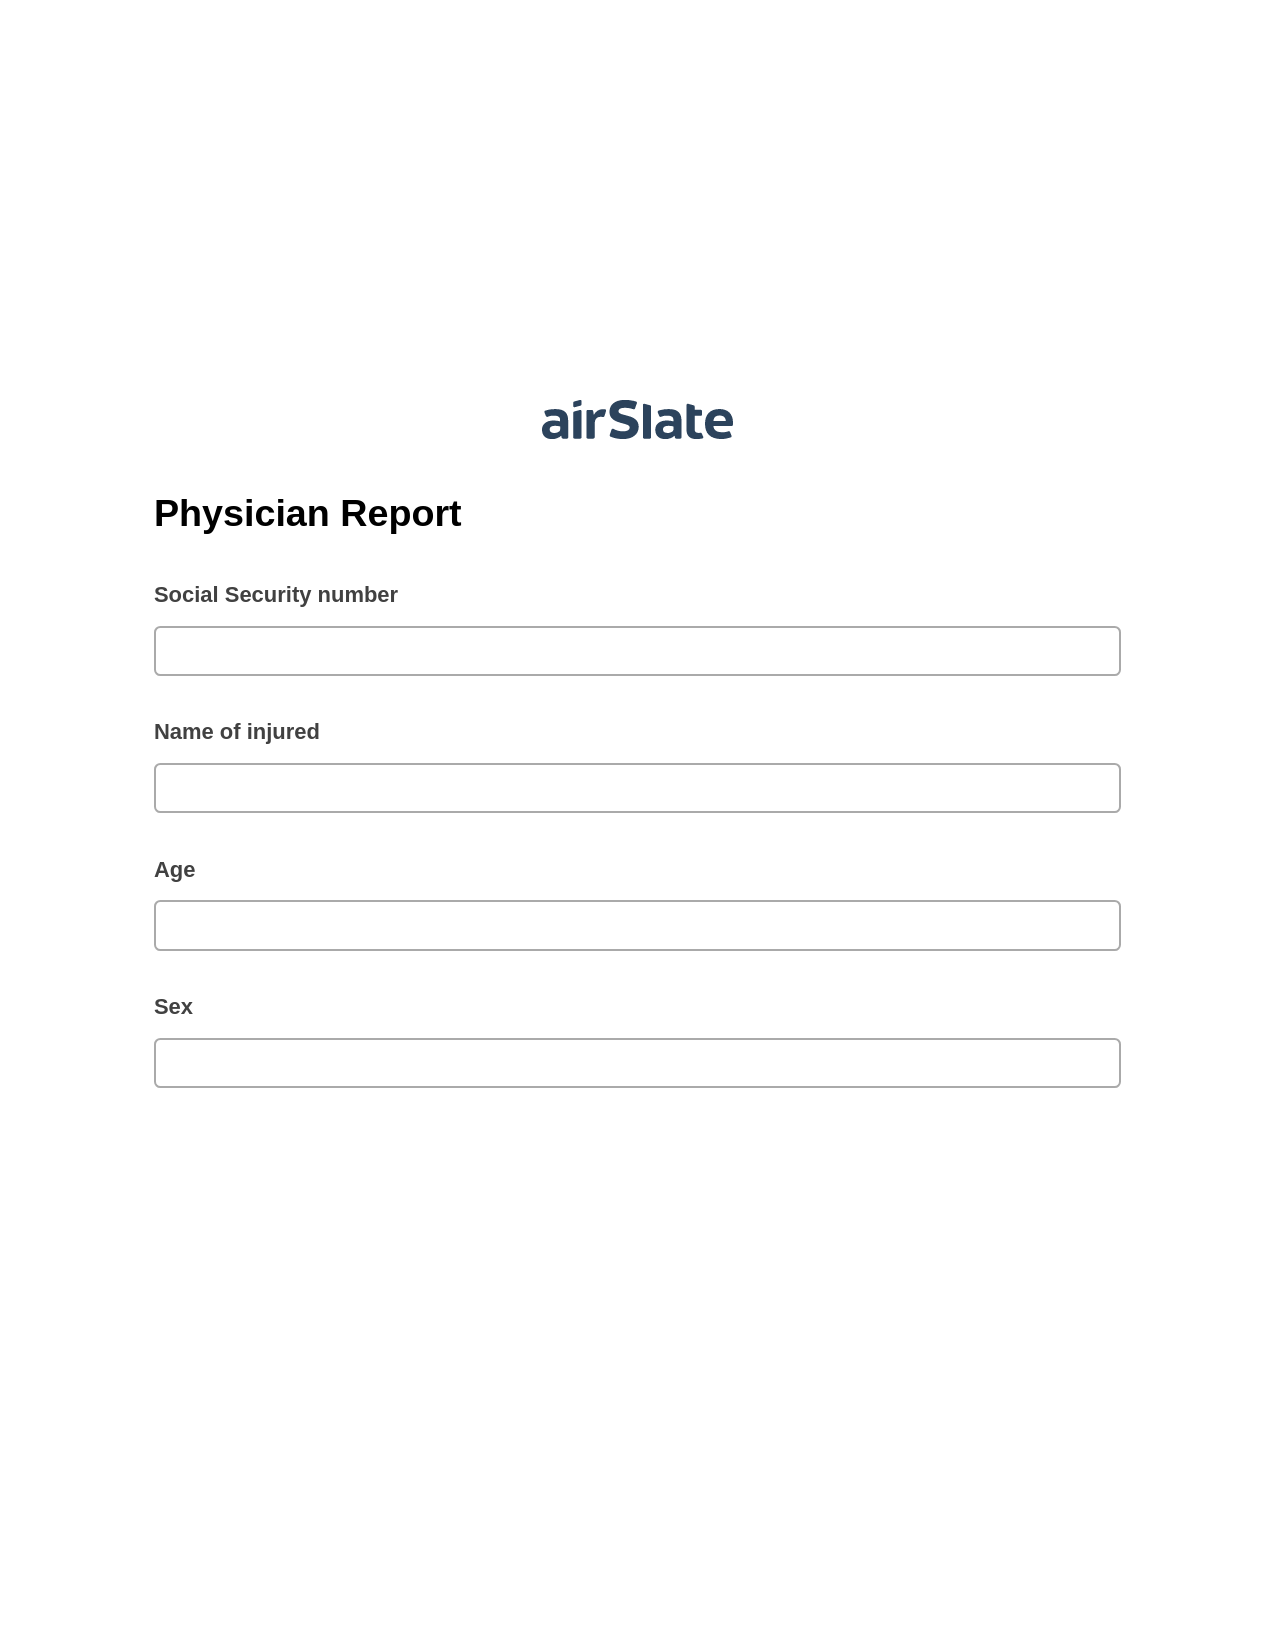 Physician Report Pre-fill Dropdowns from CSV file Bot, Unassign Role Bot, Archive to SharePoint Folder Bot